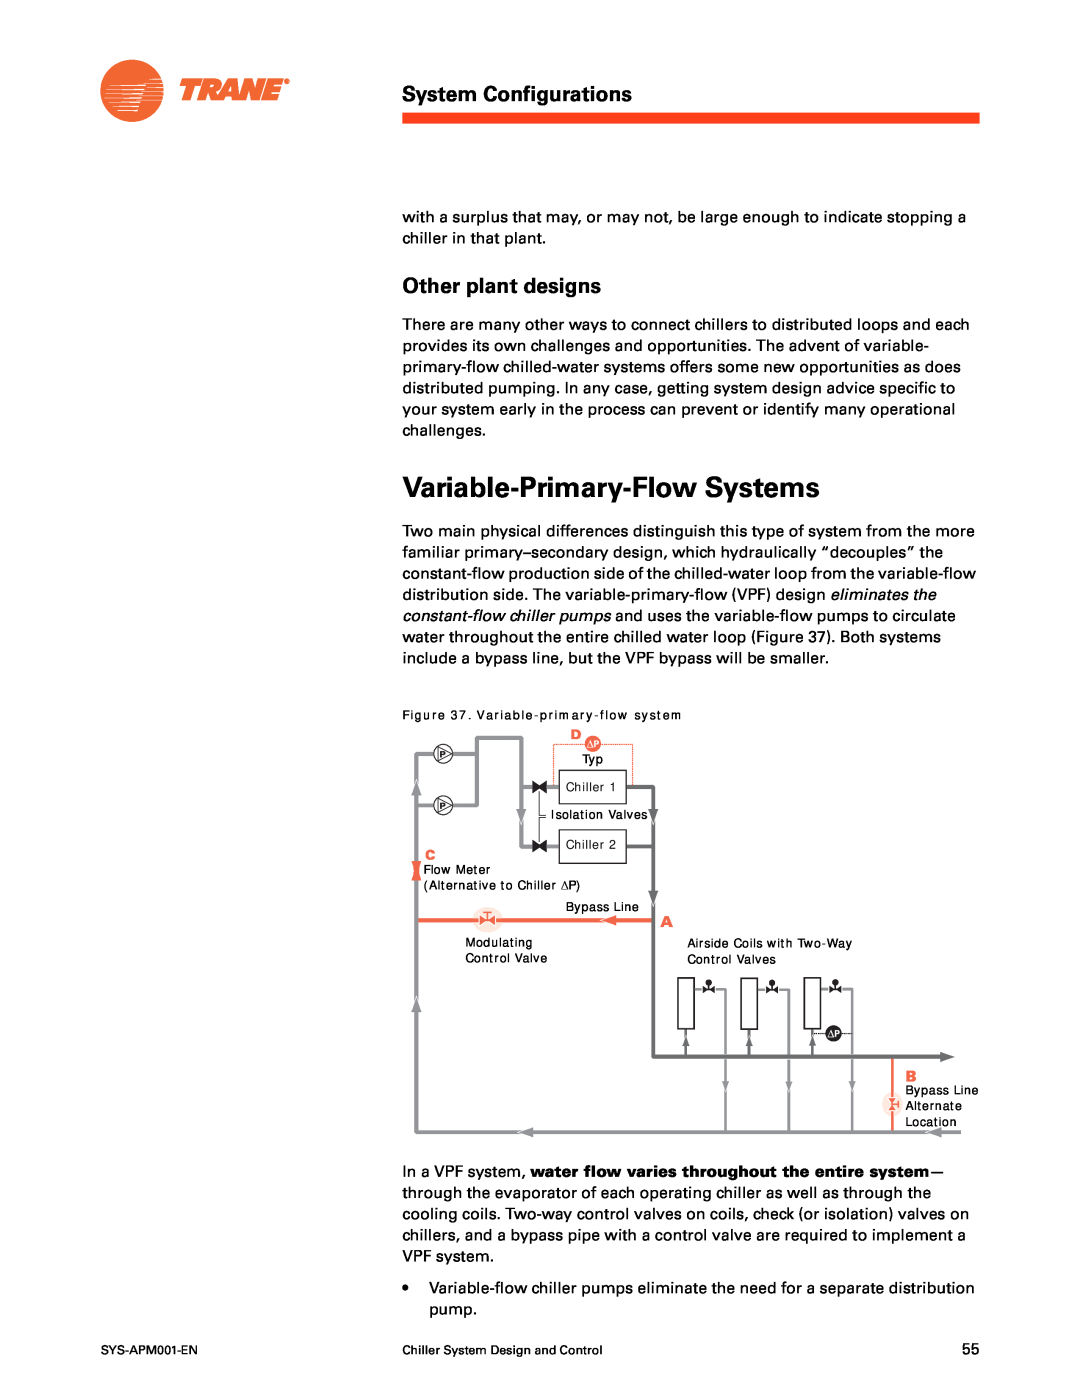 Trane SYS-APM001-EN manual Variable-Primary-Flow Systems, Other plant designs, System Configurations 